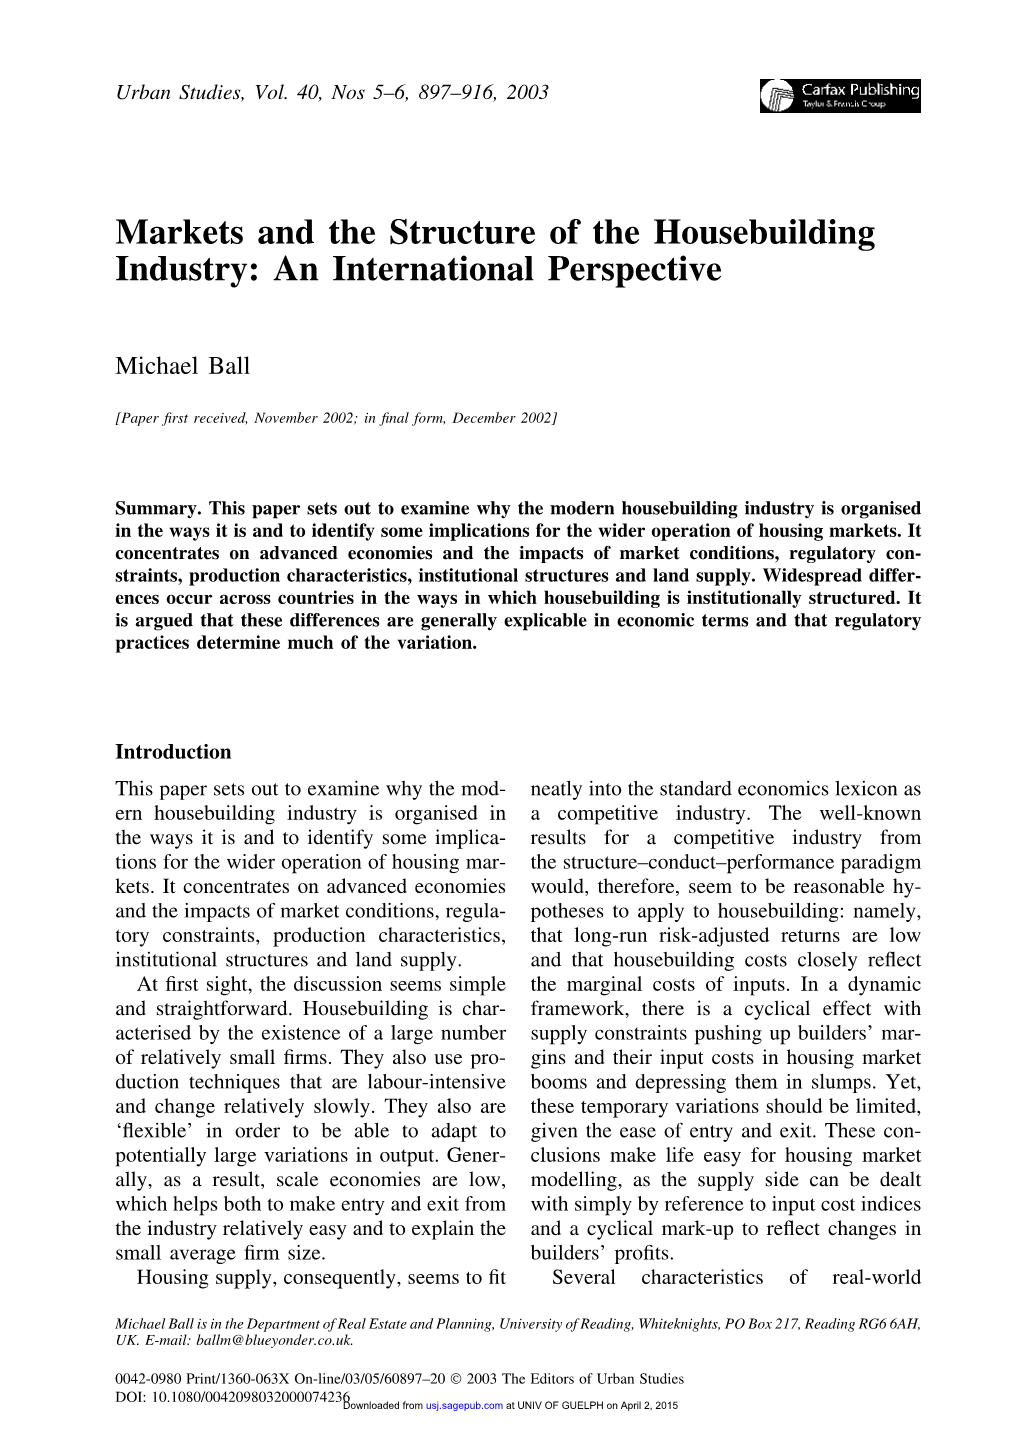 Markets and the Structure of the Housebuilding Industry: an International Perspective